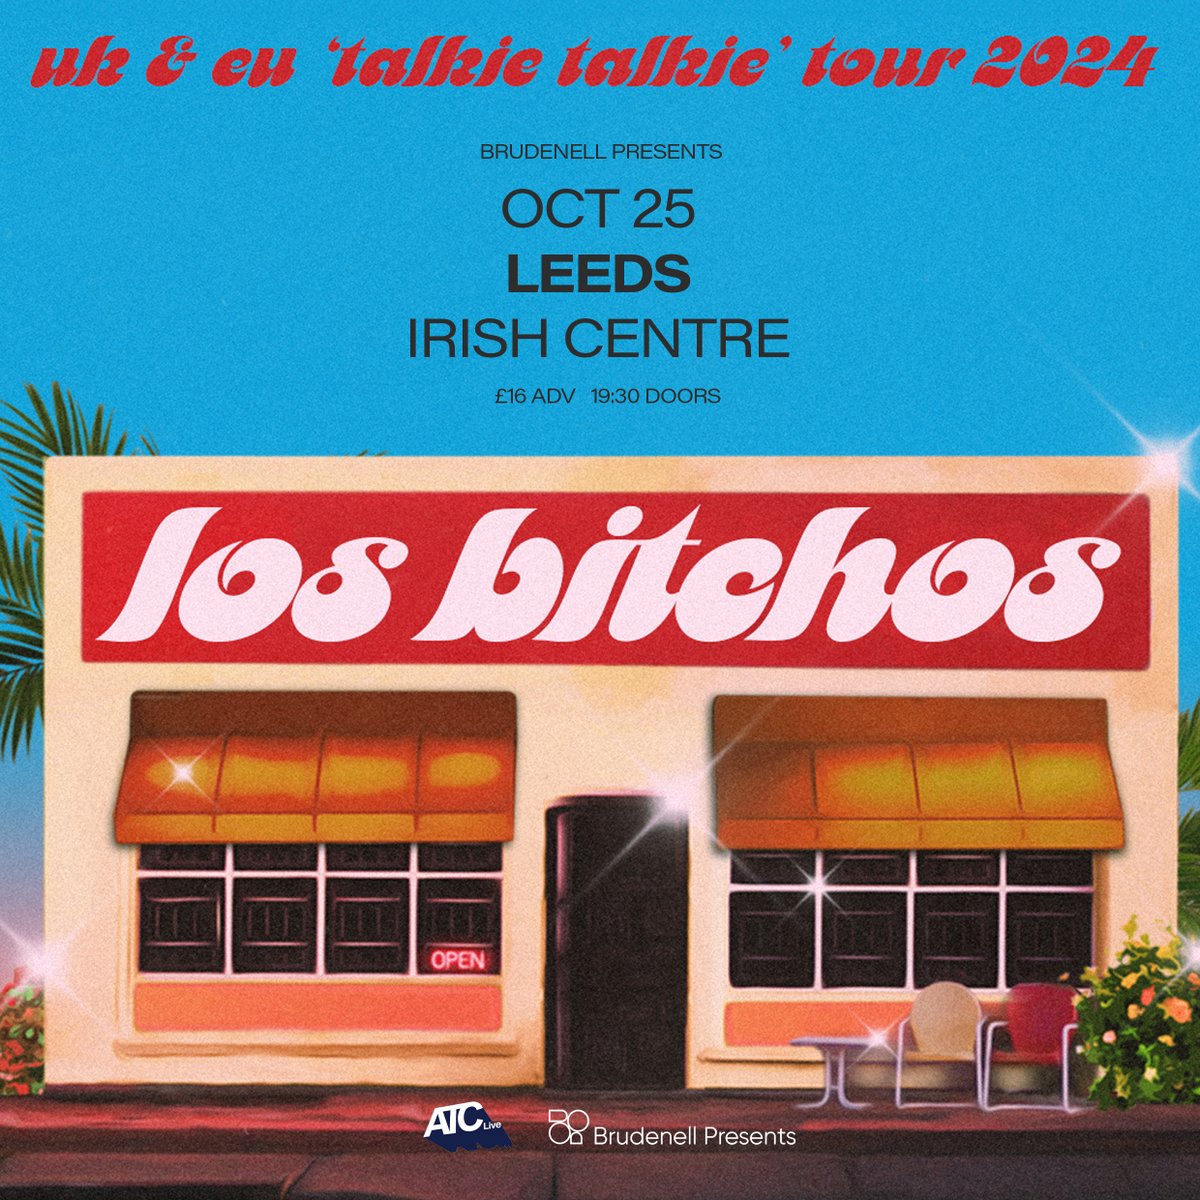 THE RETURN OF @LBitchos 🙌 Back with their new single, 'LA BOMBA' - the London-based four piece pay a visit to @LdsIrishCentre on 25th October. 💃 This is gonna be one big party - make sure you secure your spot this Friday @ 10AM. 🎟️ ➡️ bit.ly/Los-Bitchos-Lds